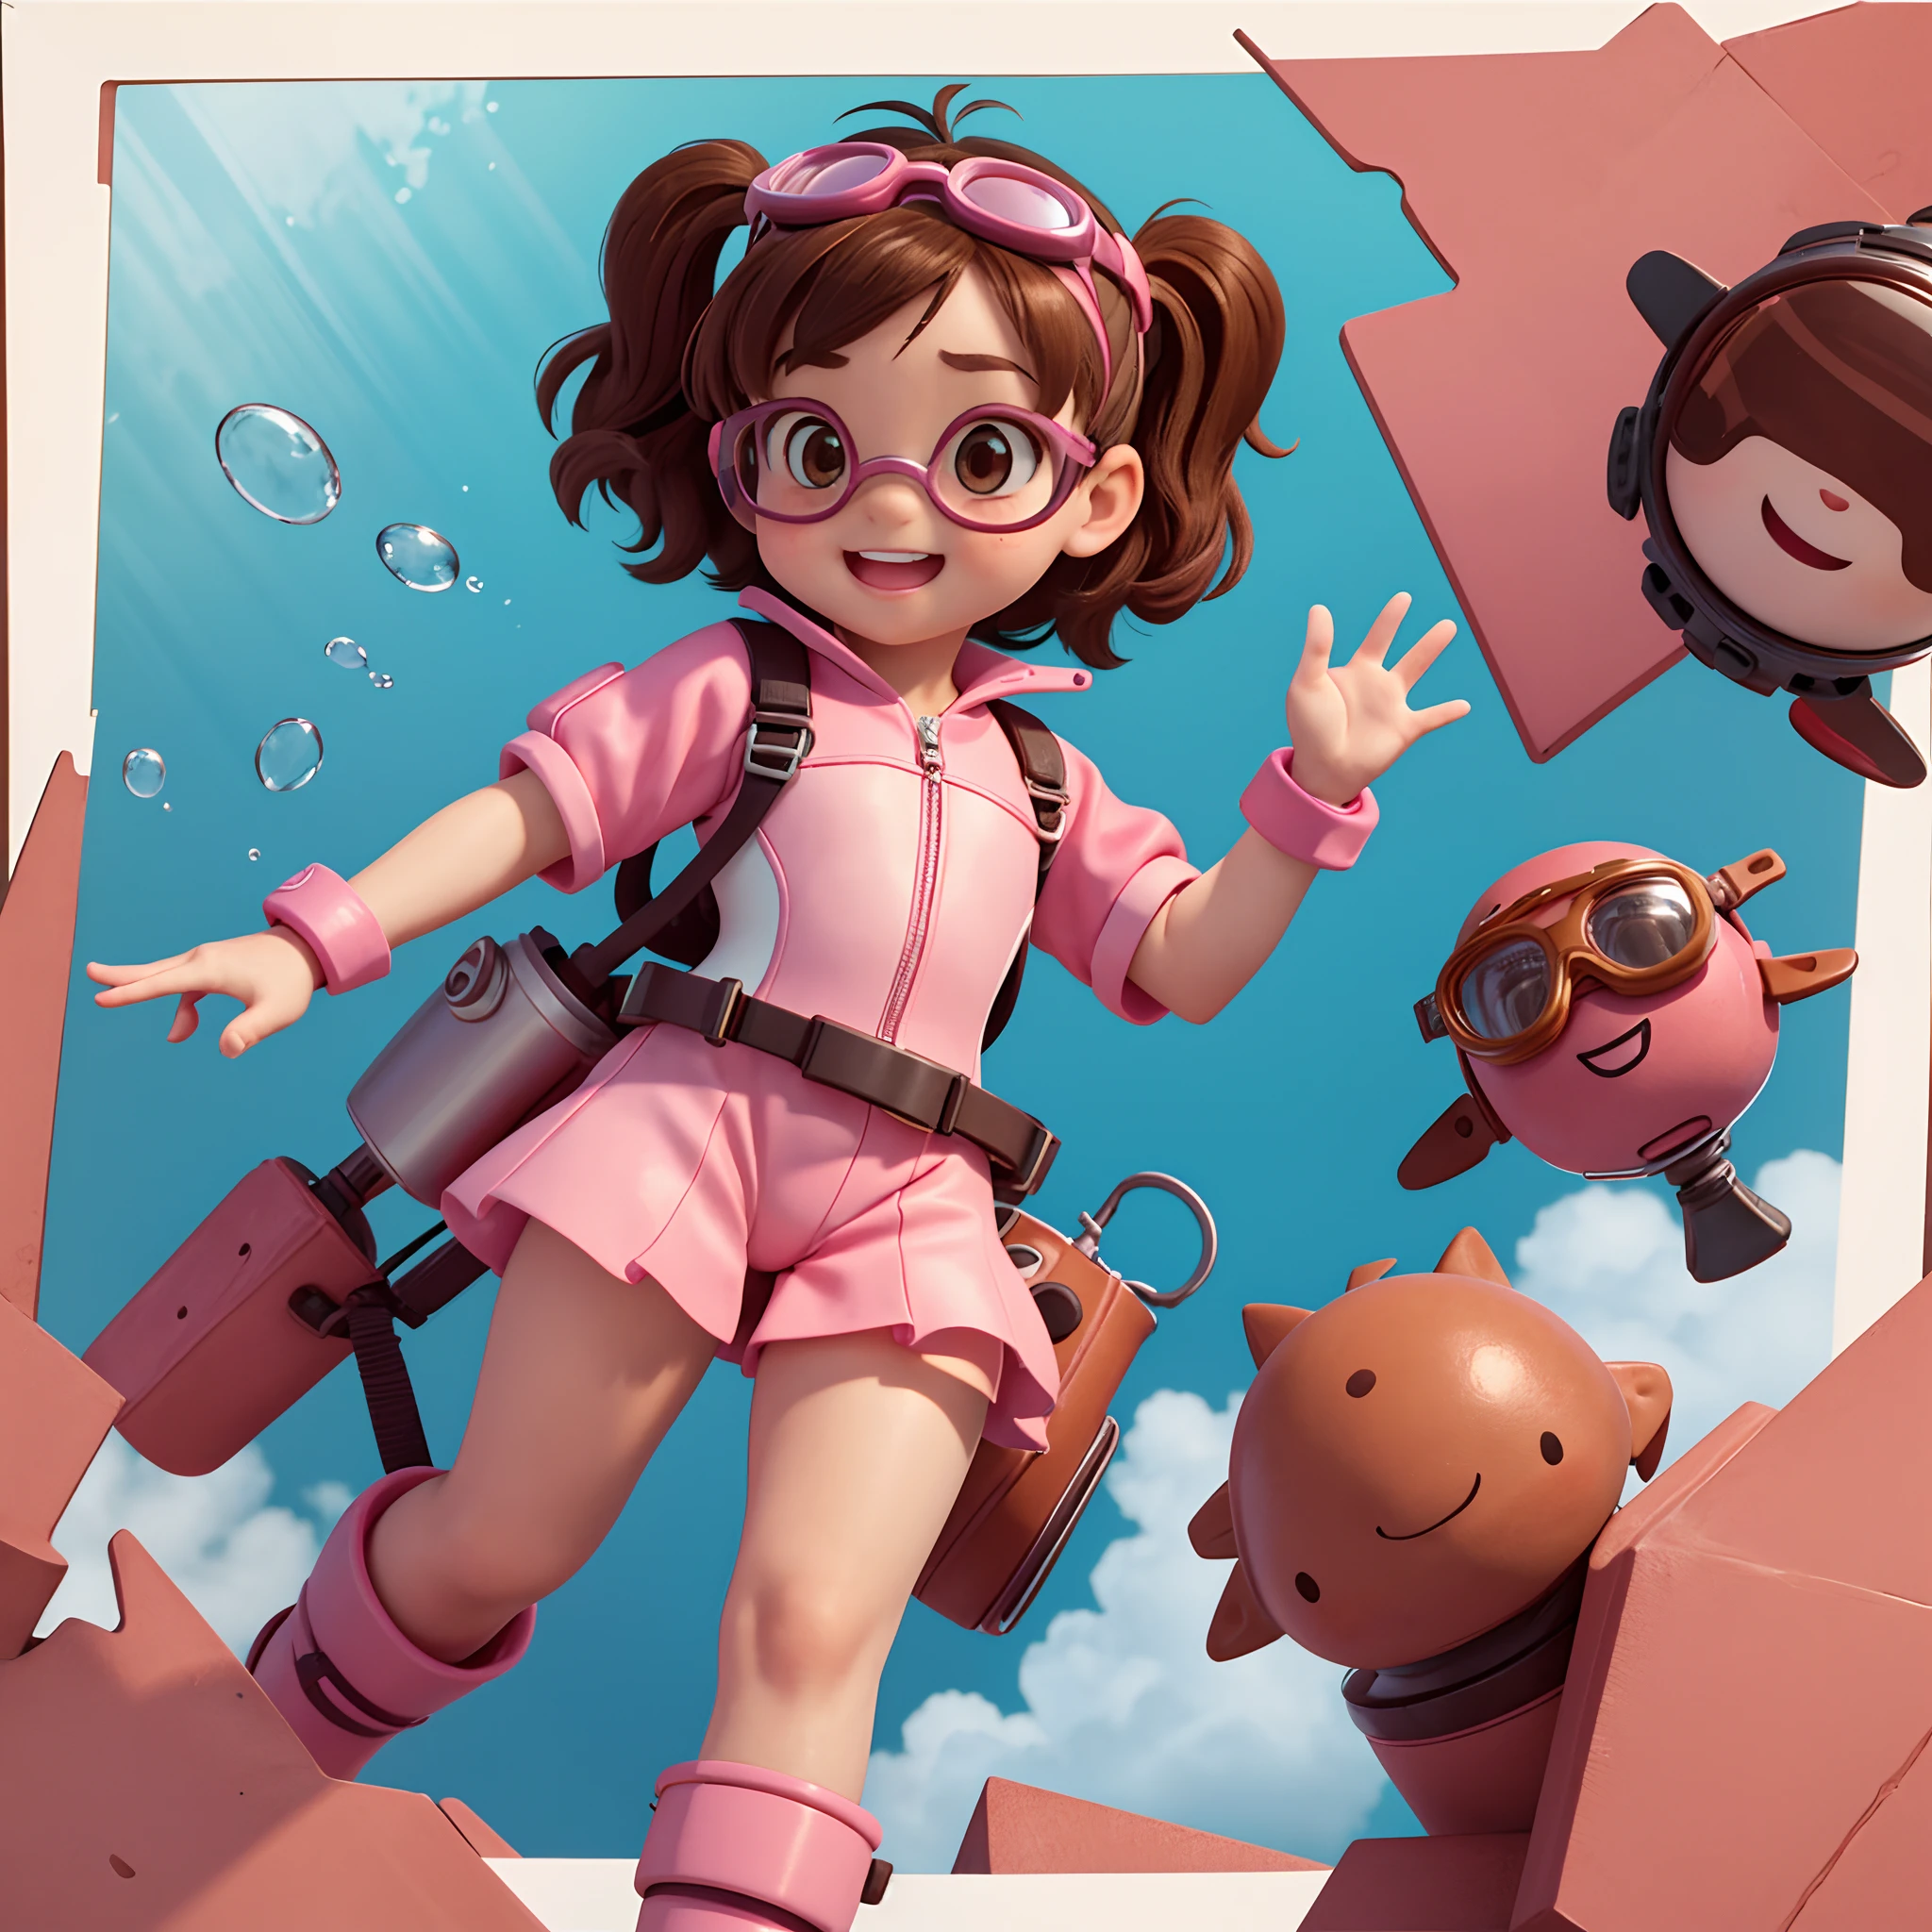 Front-facing image, a 4-year-old little girl waving her hand towards the camera, 3 frames for character animation, identical character design in each frame, the  is alone, happy, with brown hair, brown eyes, rosy cheeks, diving goggles, pink diving suit, diving gloves, diving shoes, clean background, white background.